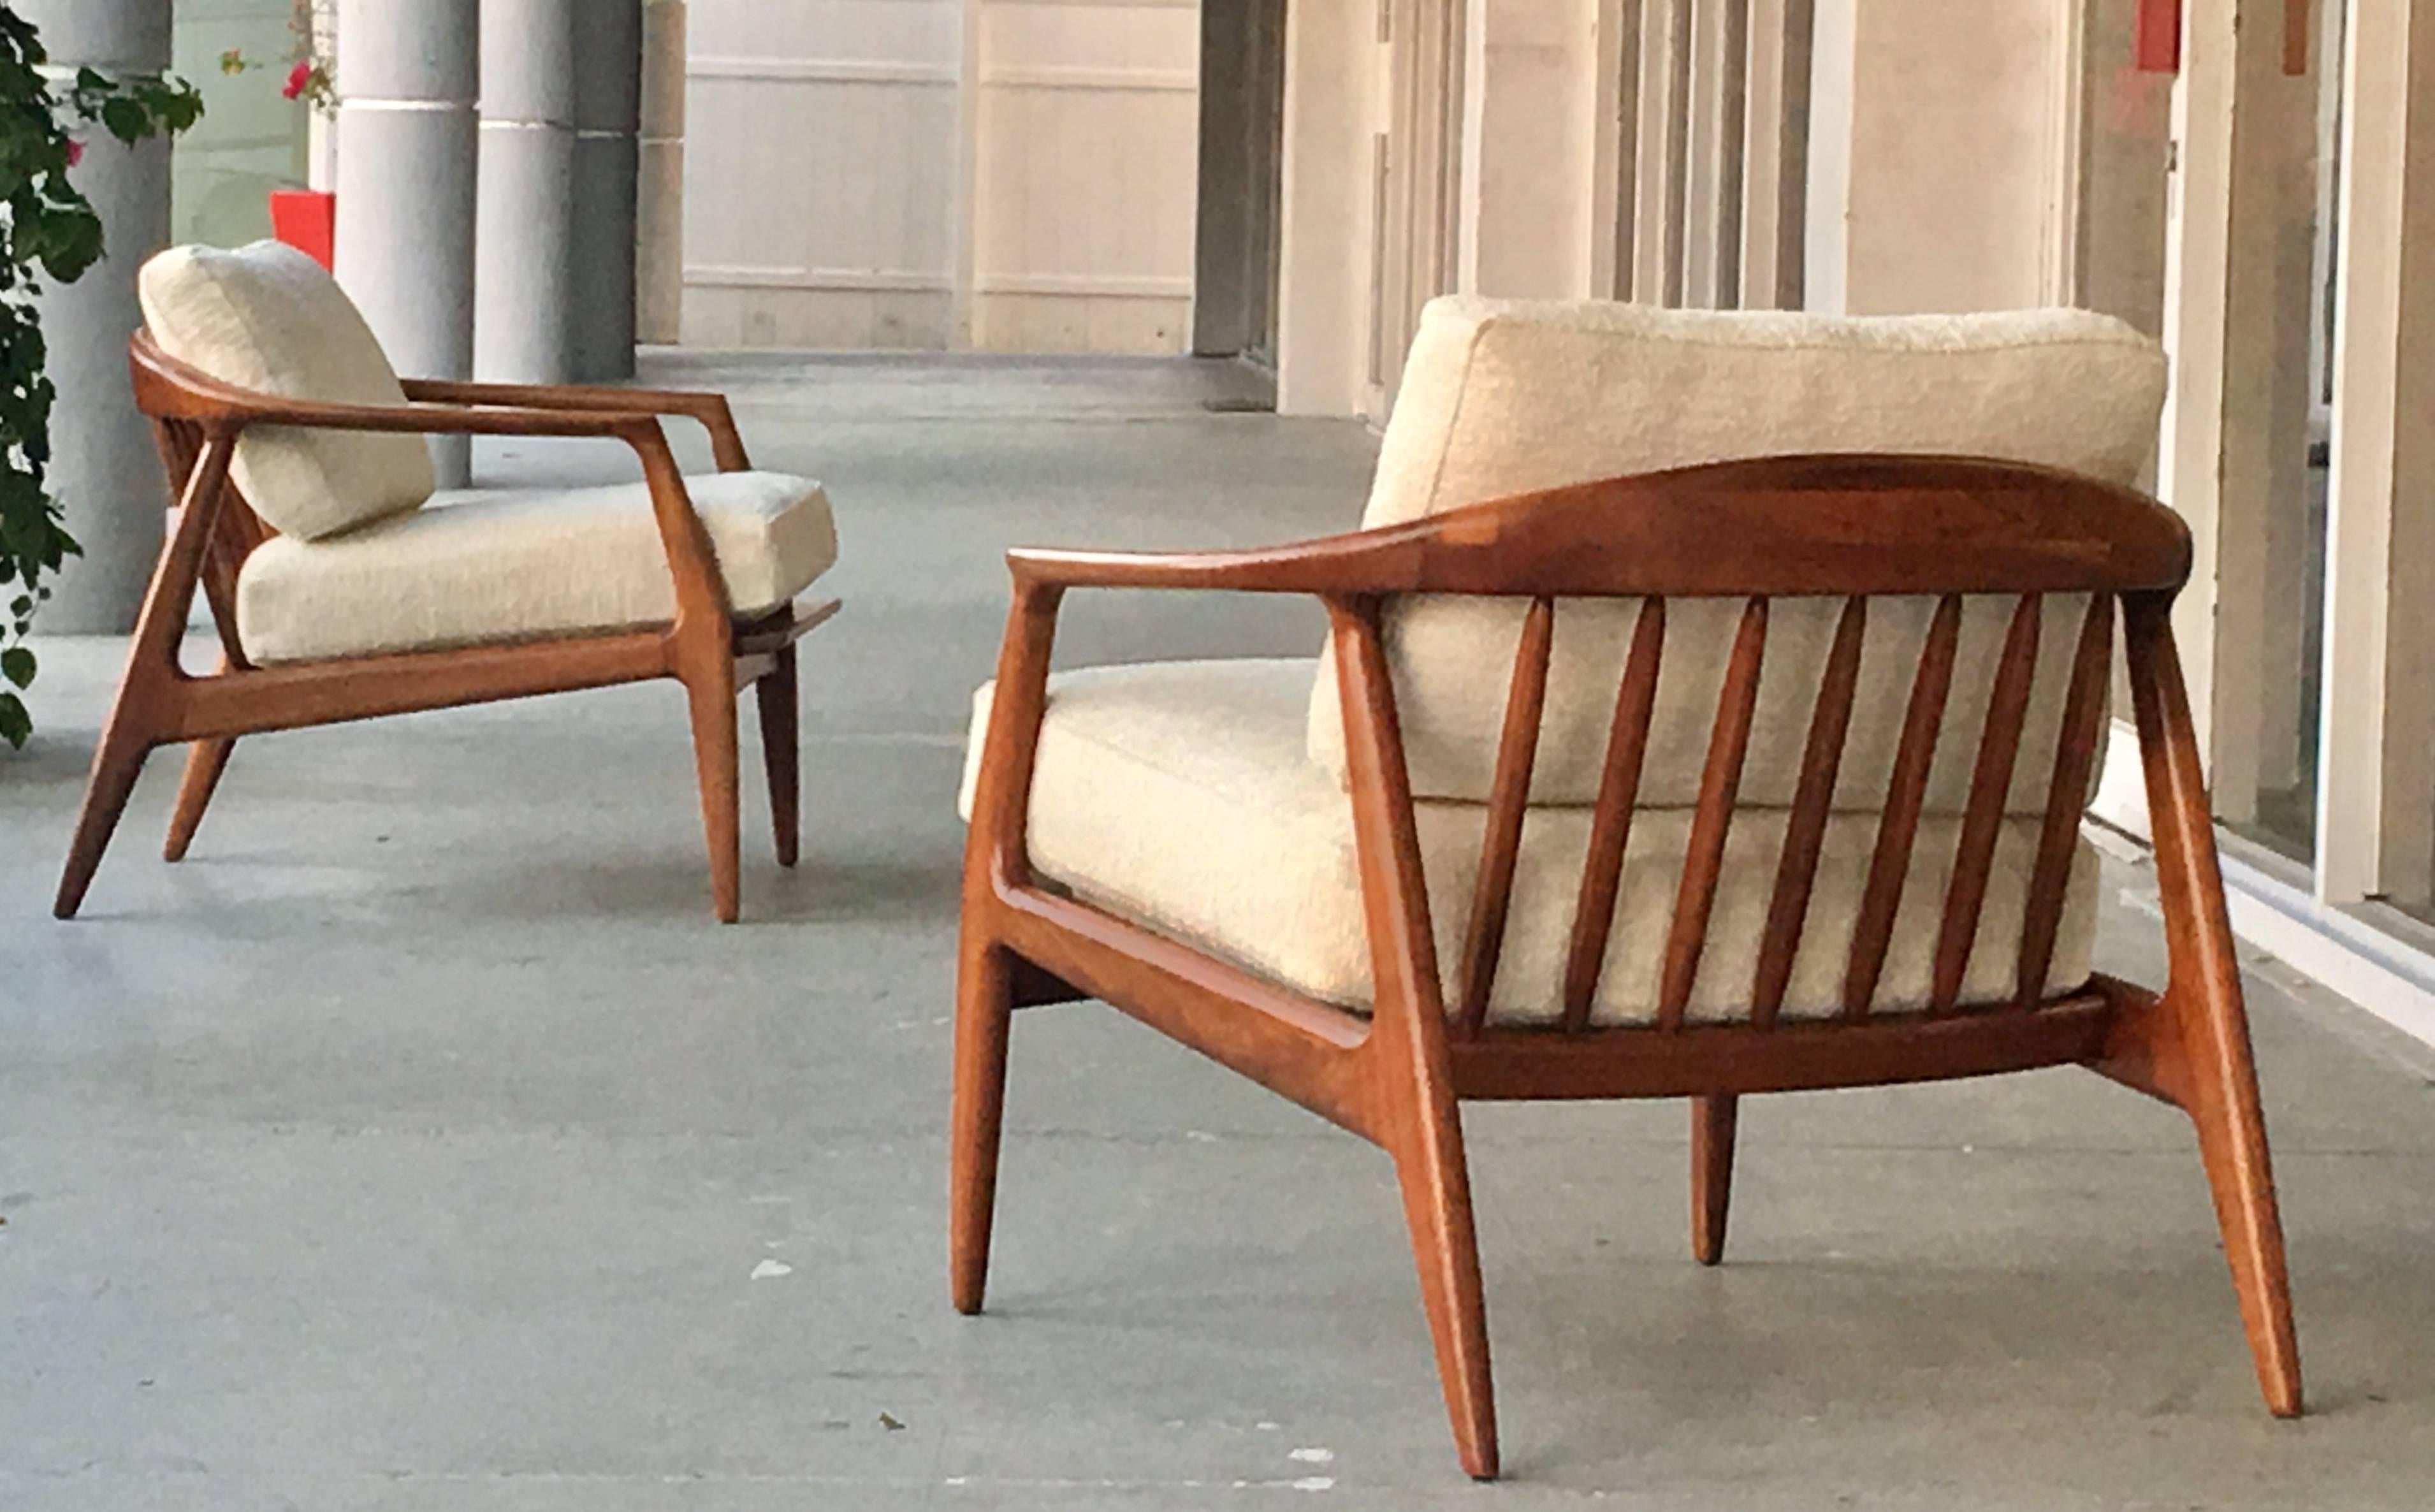 A pair of great looking lounge chairs by Milo Baughman. Solid walnut frames with removable cushions. Great lines and proportions. Two pairs available.